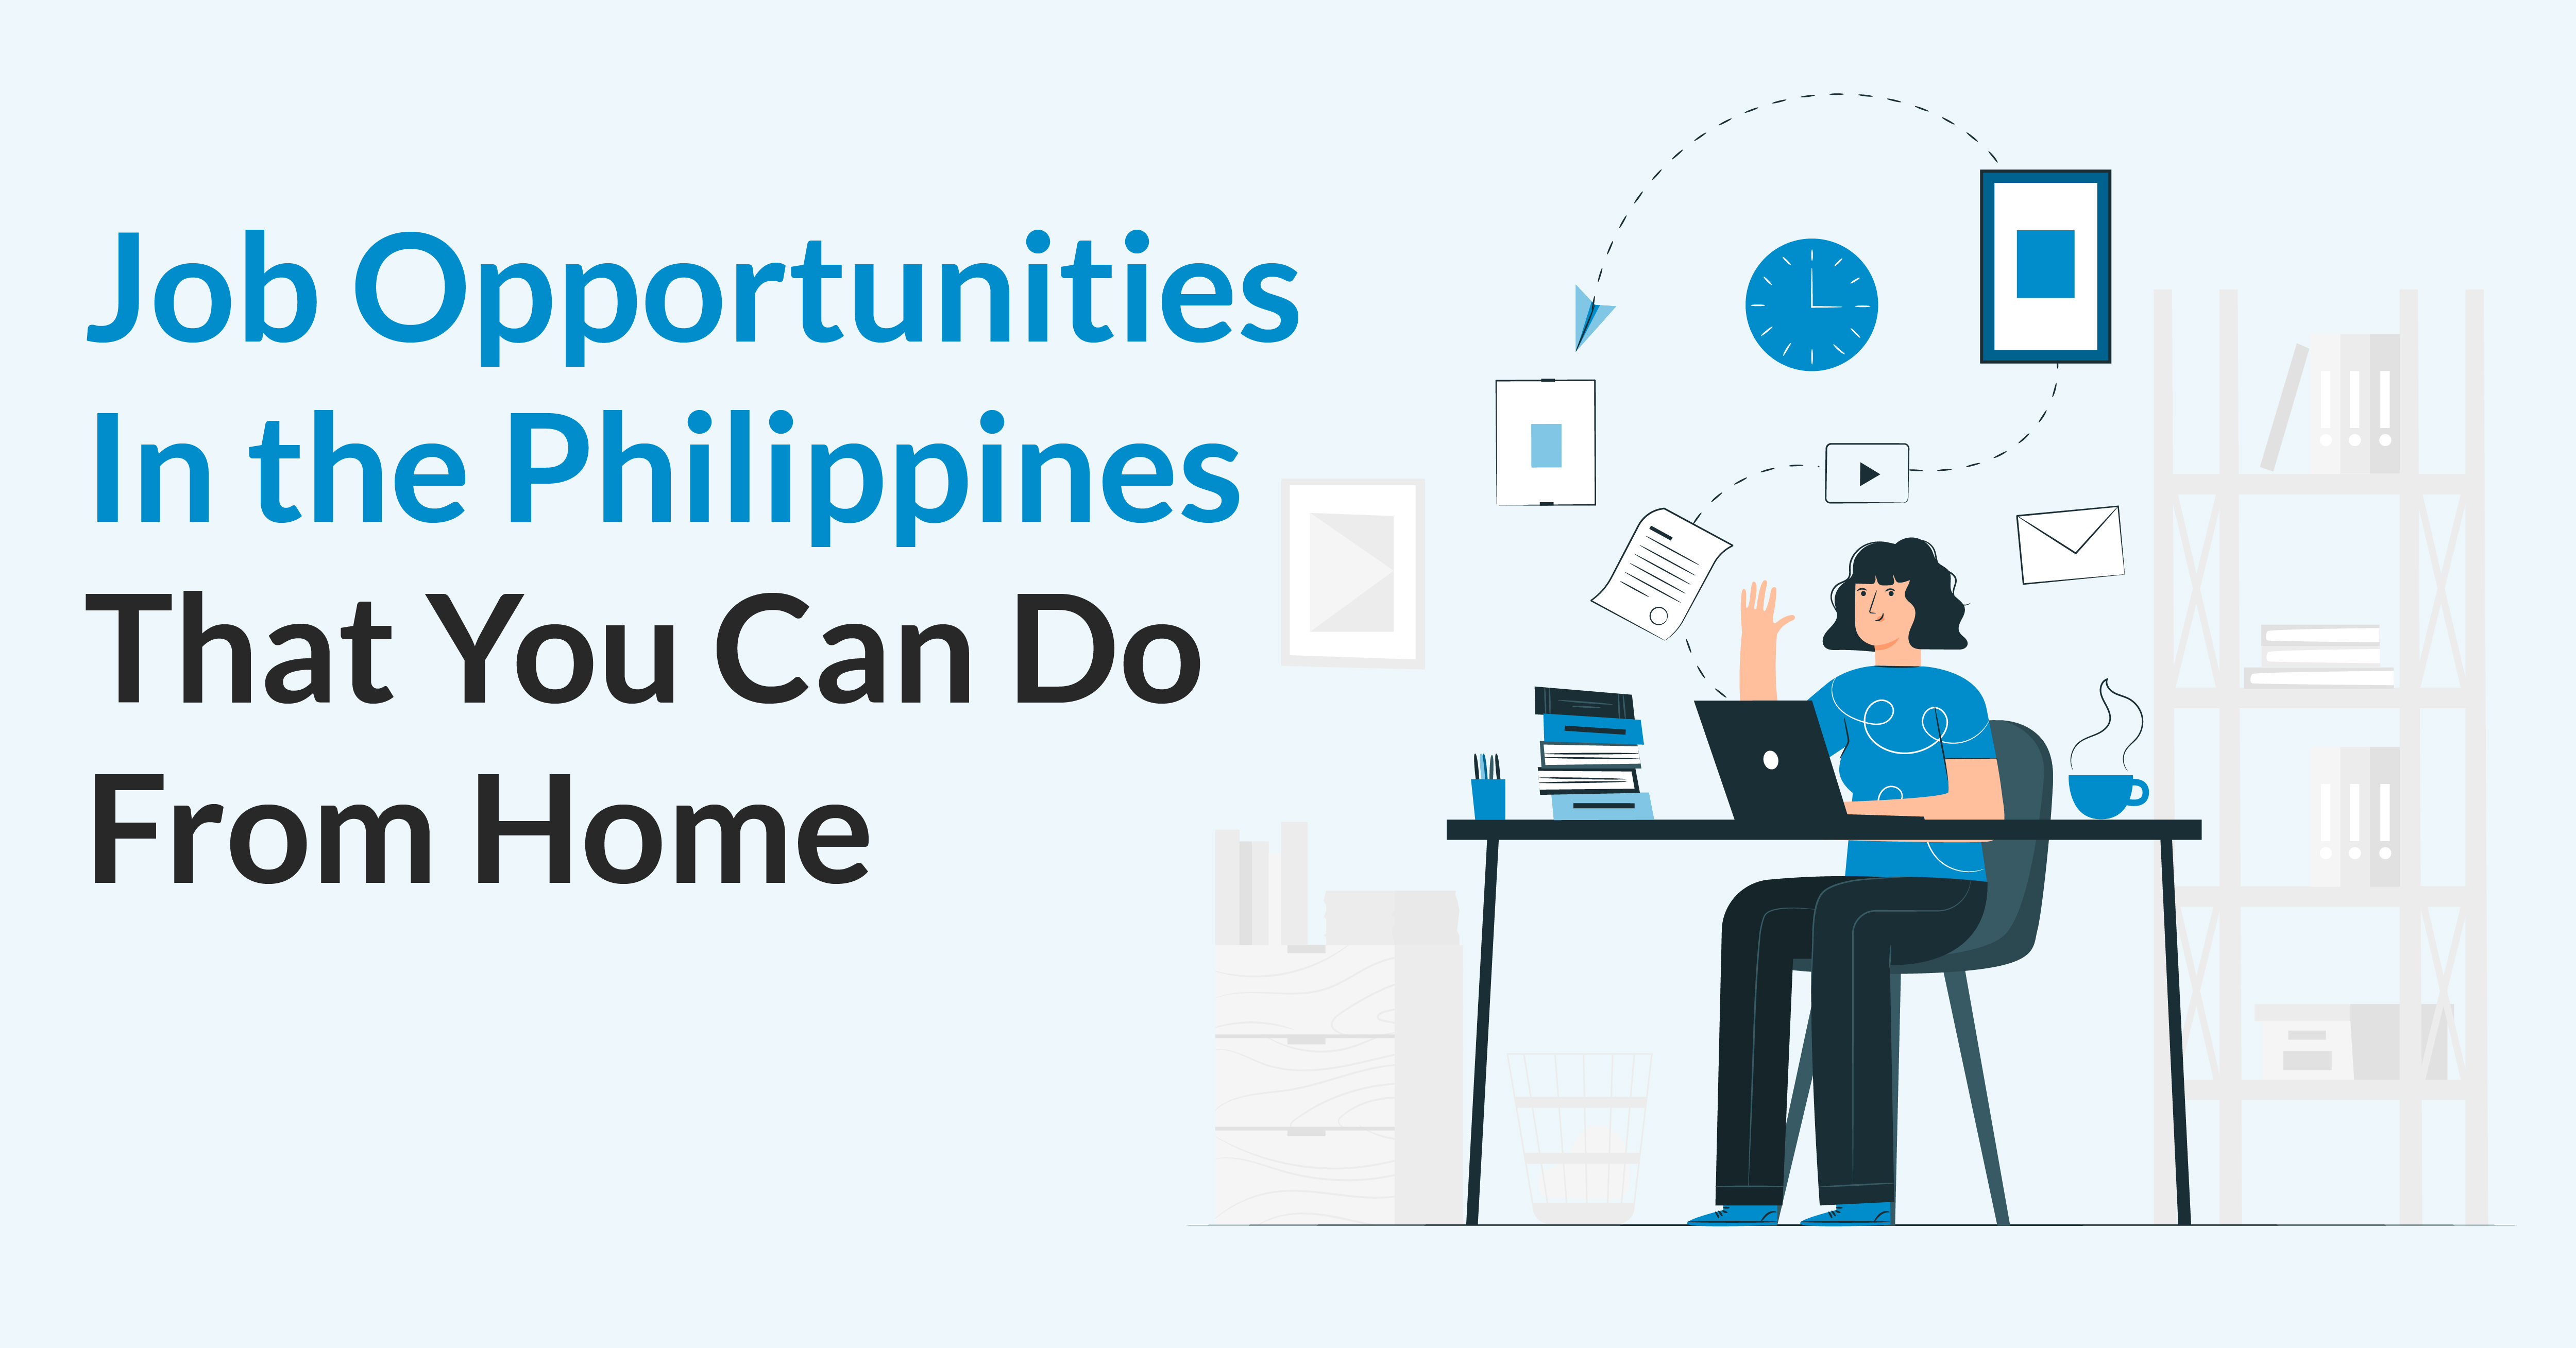 Job Opportunities In the Philippines That You Can Do From Home